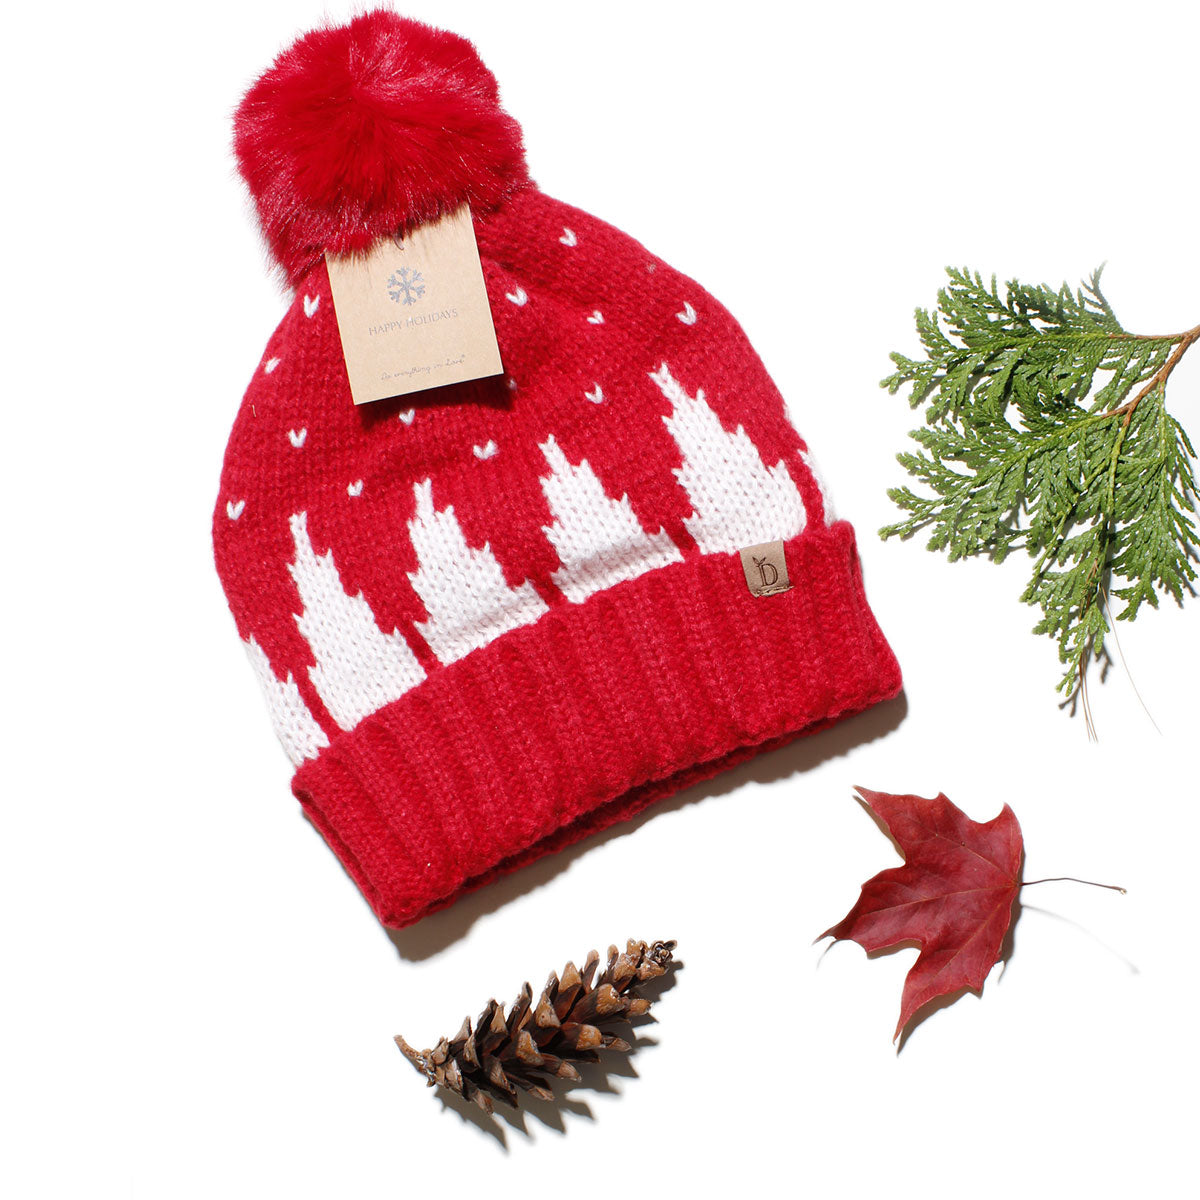 Beanie Hat Acrylic Red Snowing Pom Hat for Women